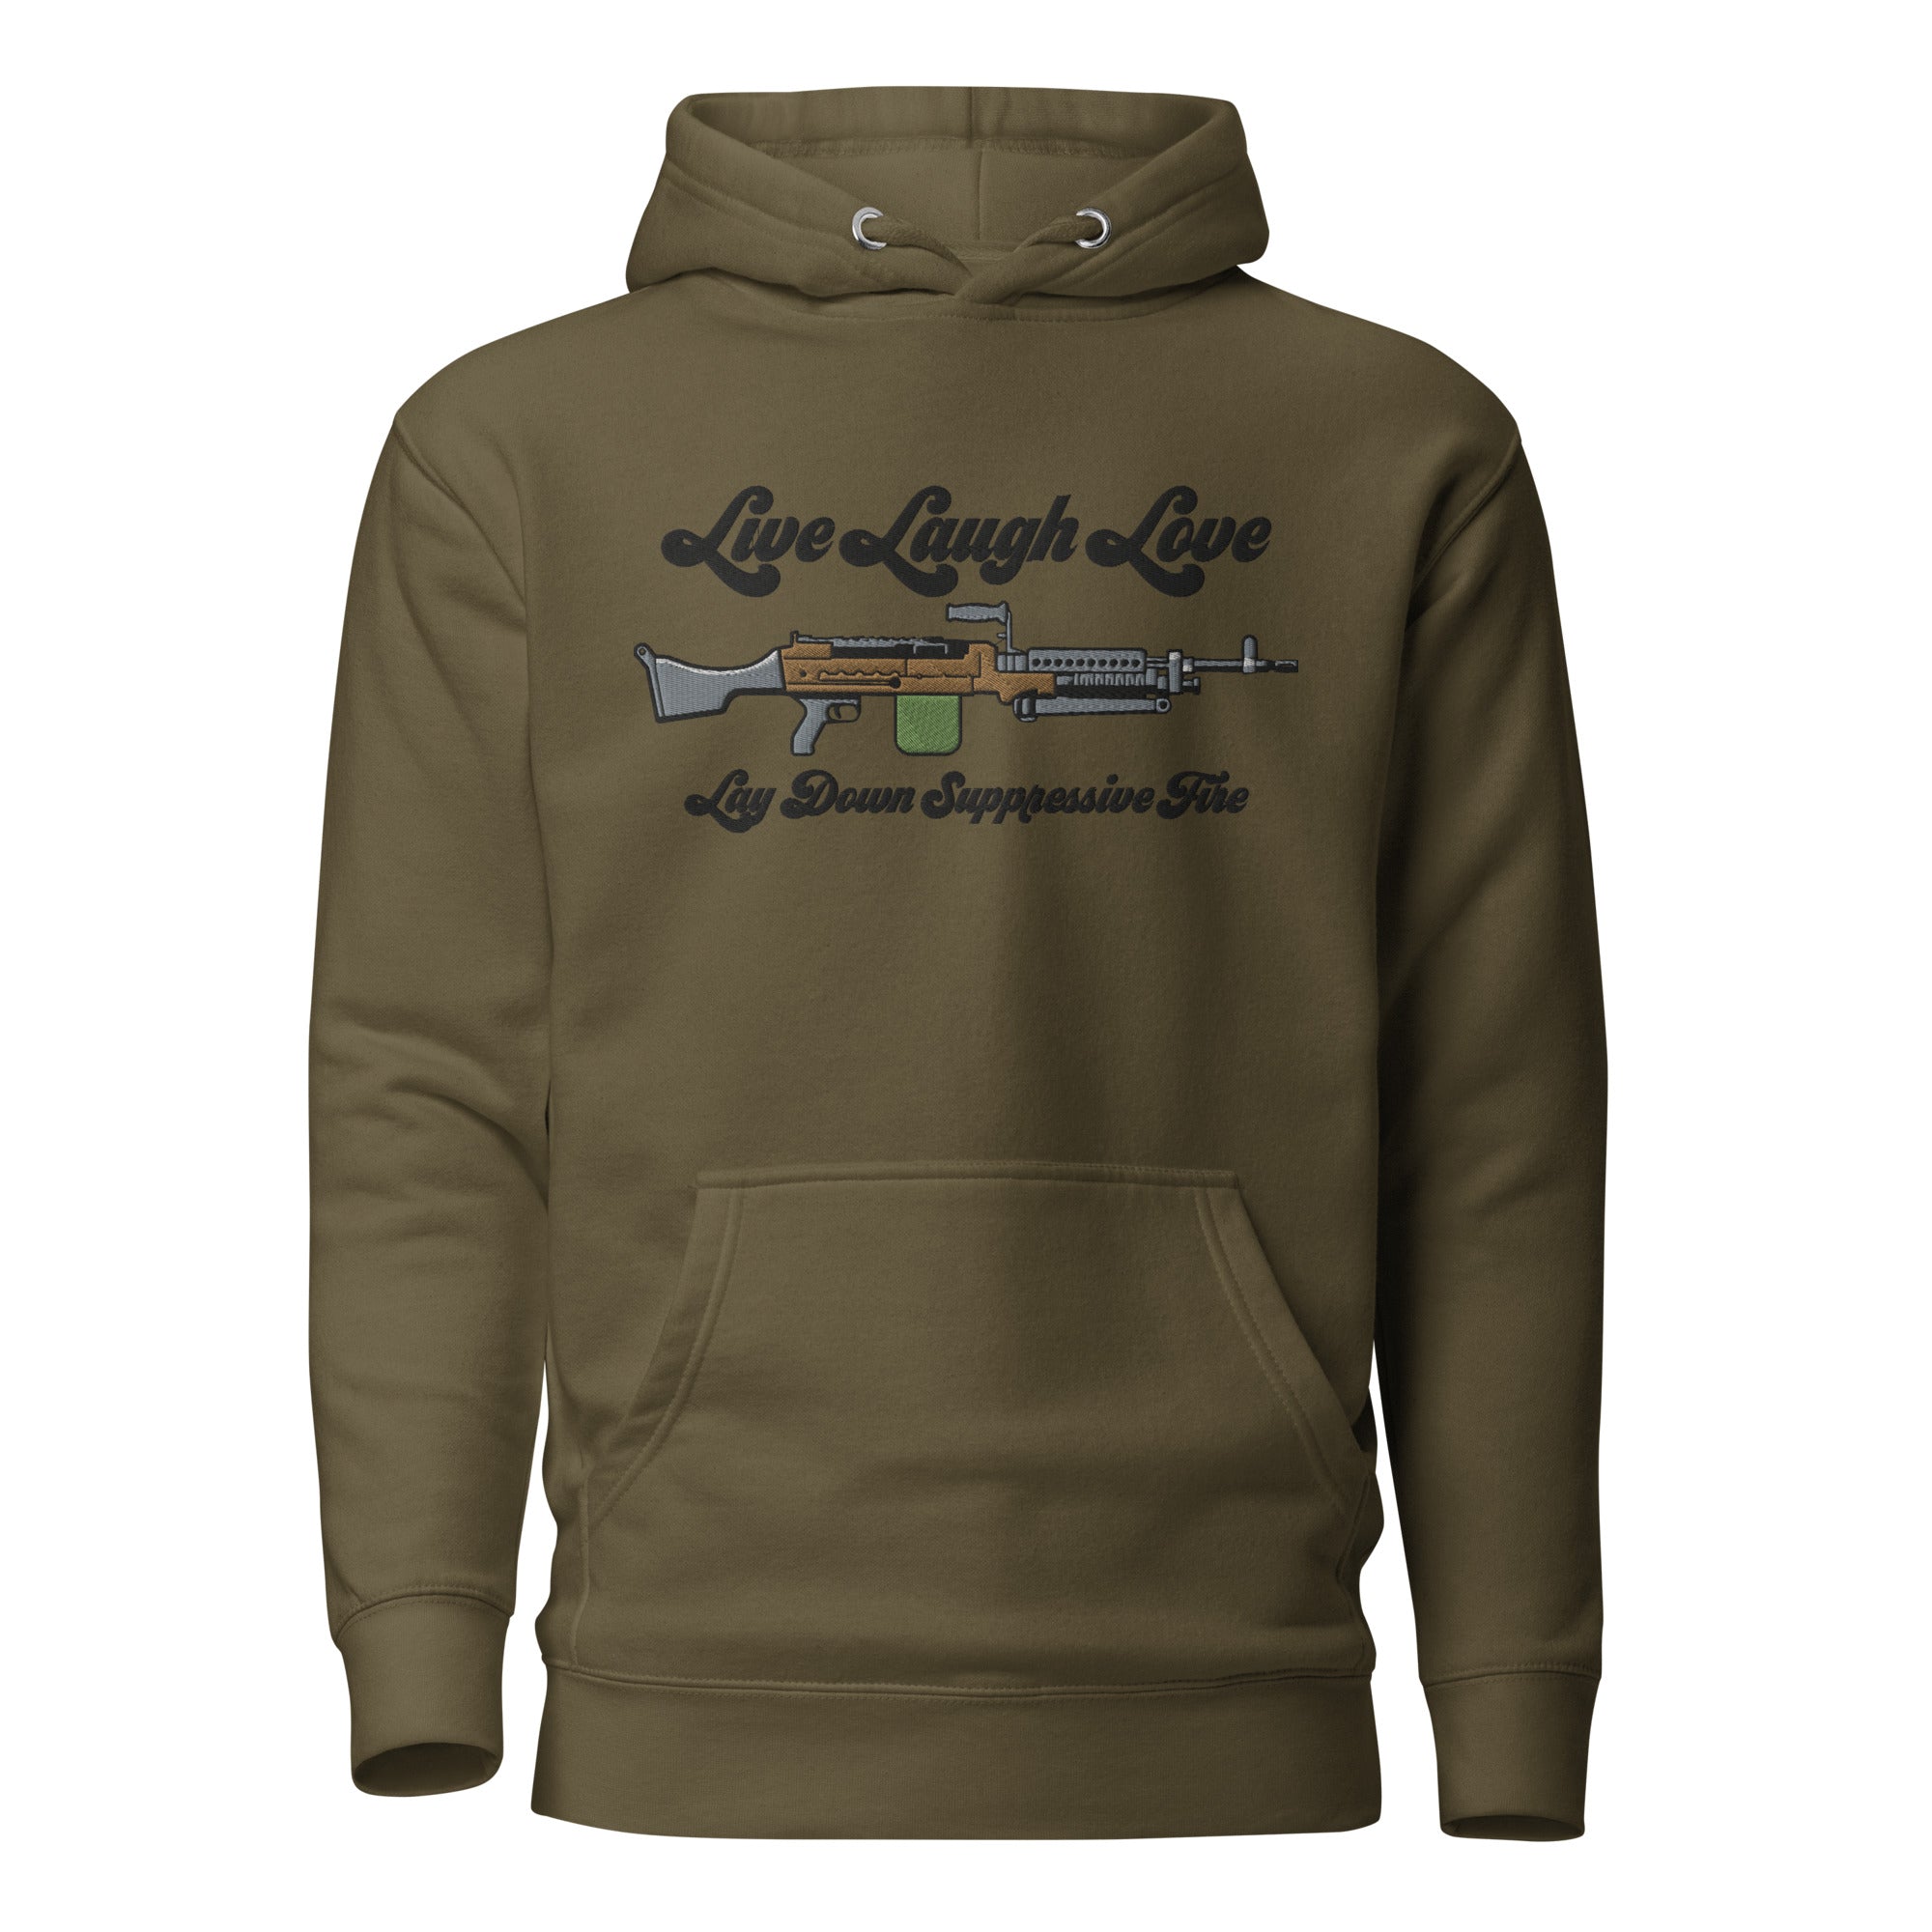 Live Laugh Love Lay Down Suppressive Fire Unisex Hoodie